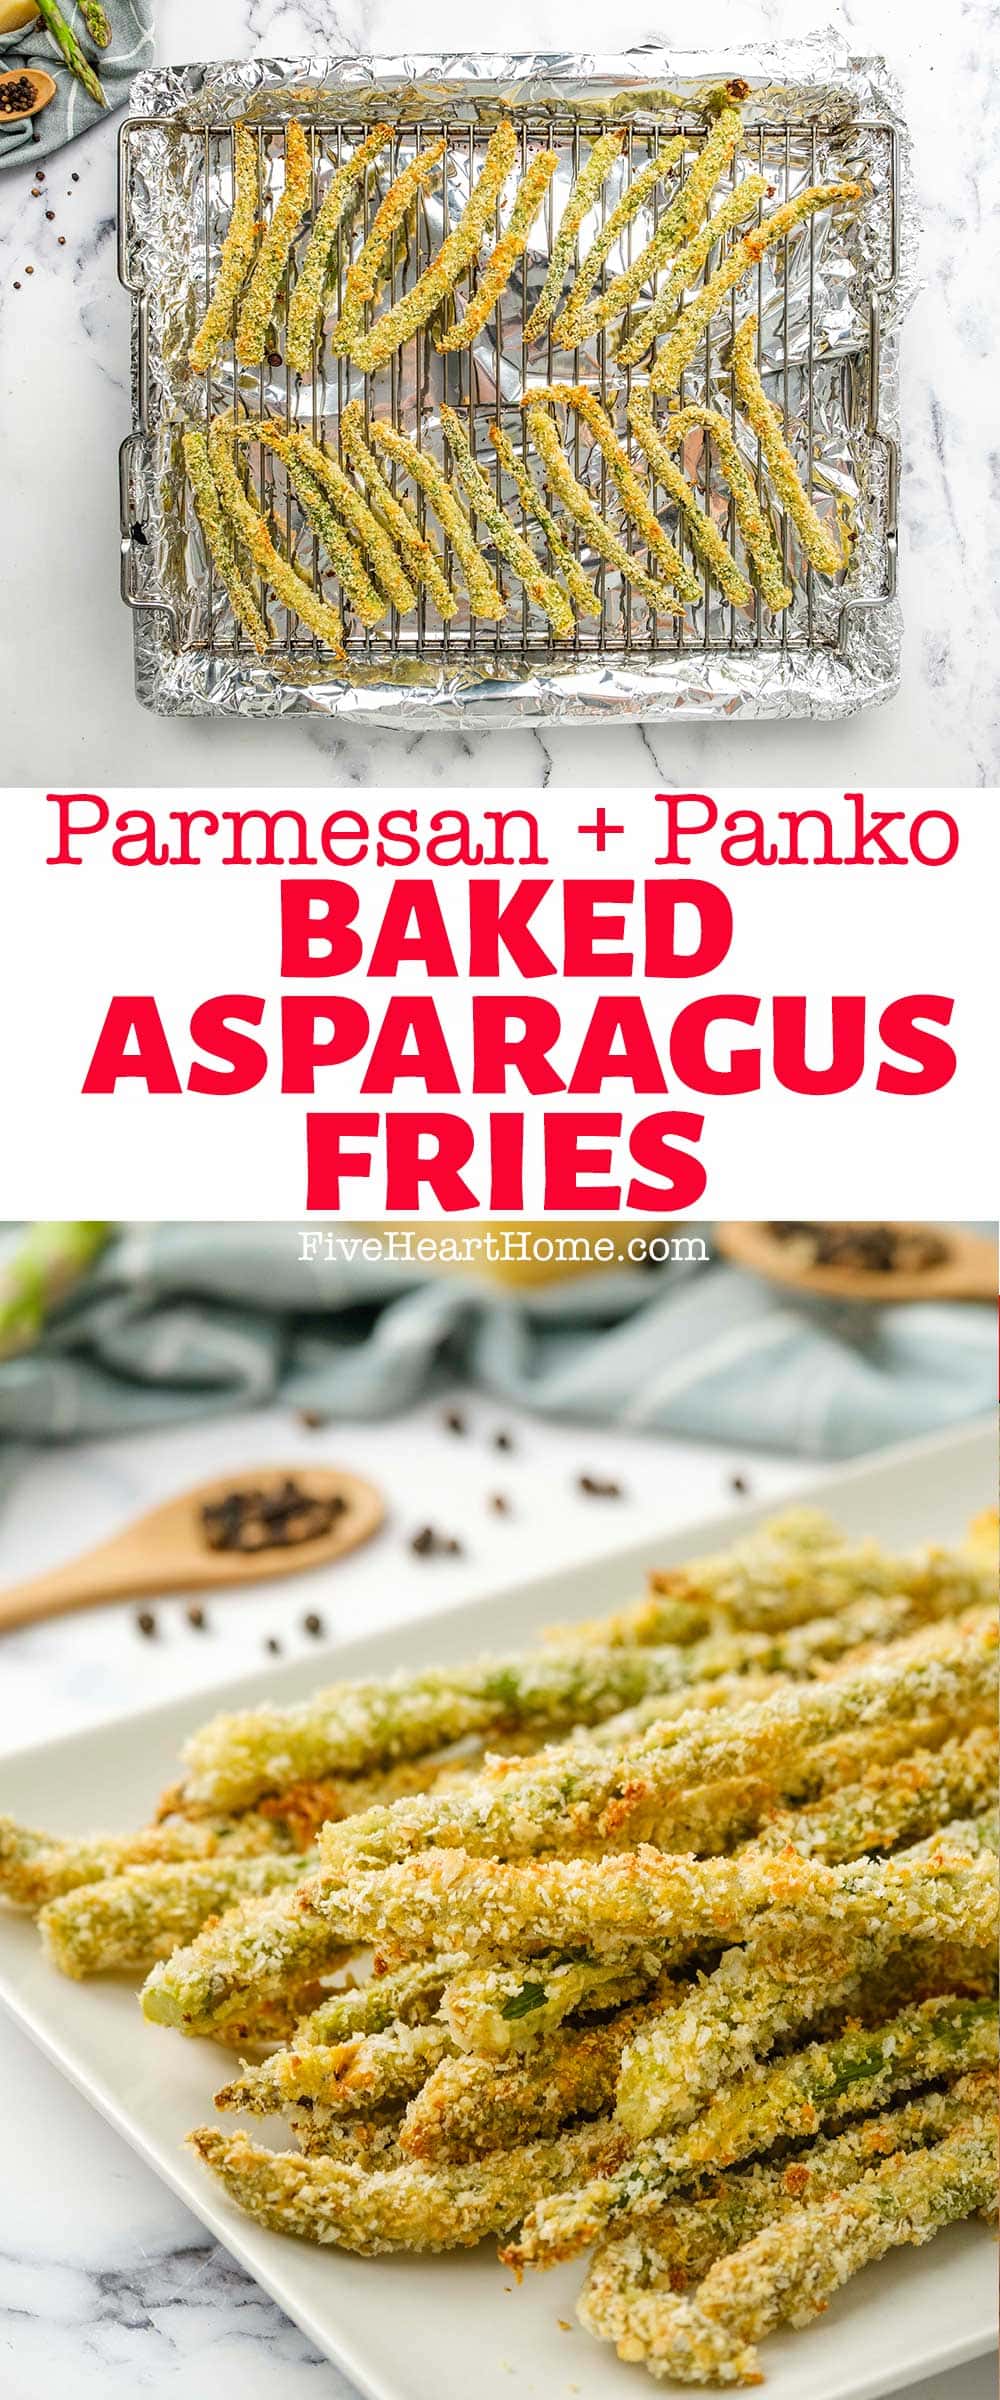 Asparagus Fries ~ Panko and Parmesan crusted asparagus spears that are breaded and baked until crispy and golden brown for an addictive, healthy side dish or snack! | FiveHeartHome.com via @fivehearthome